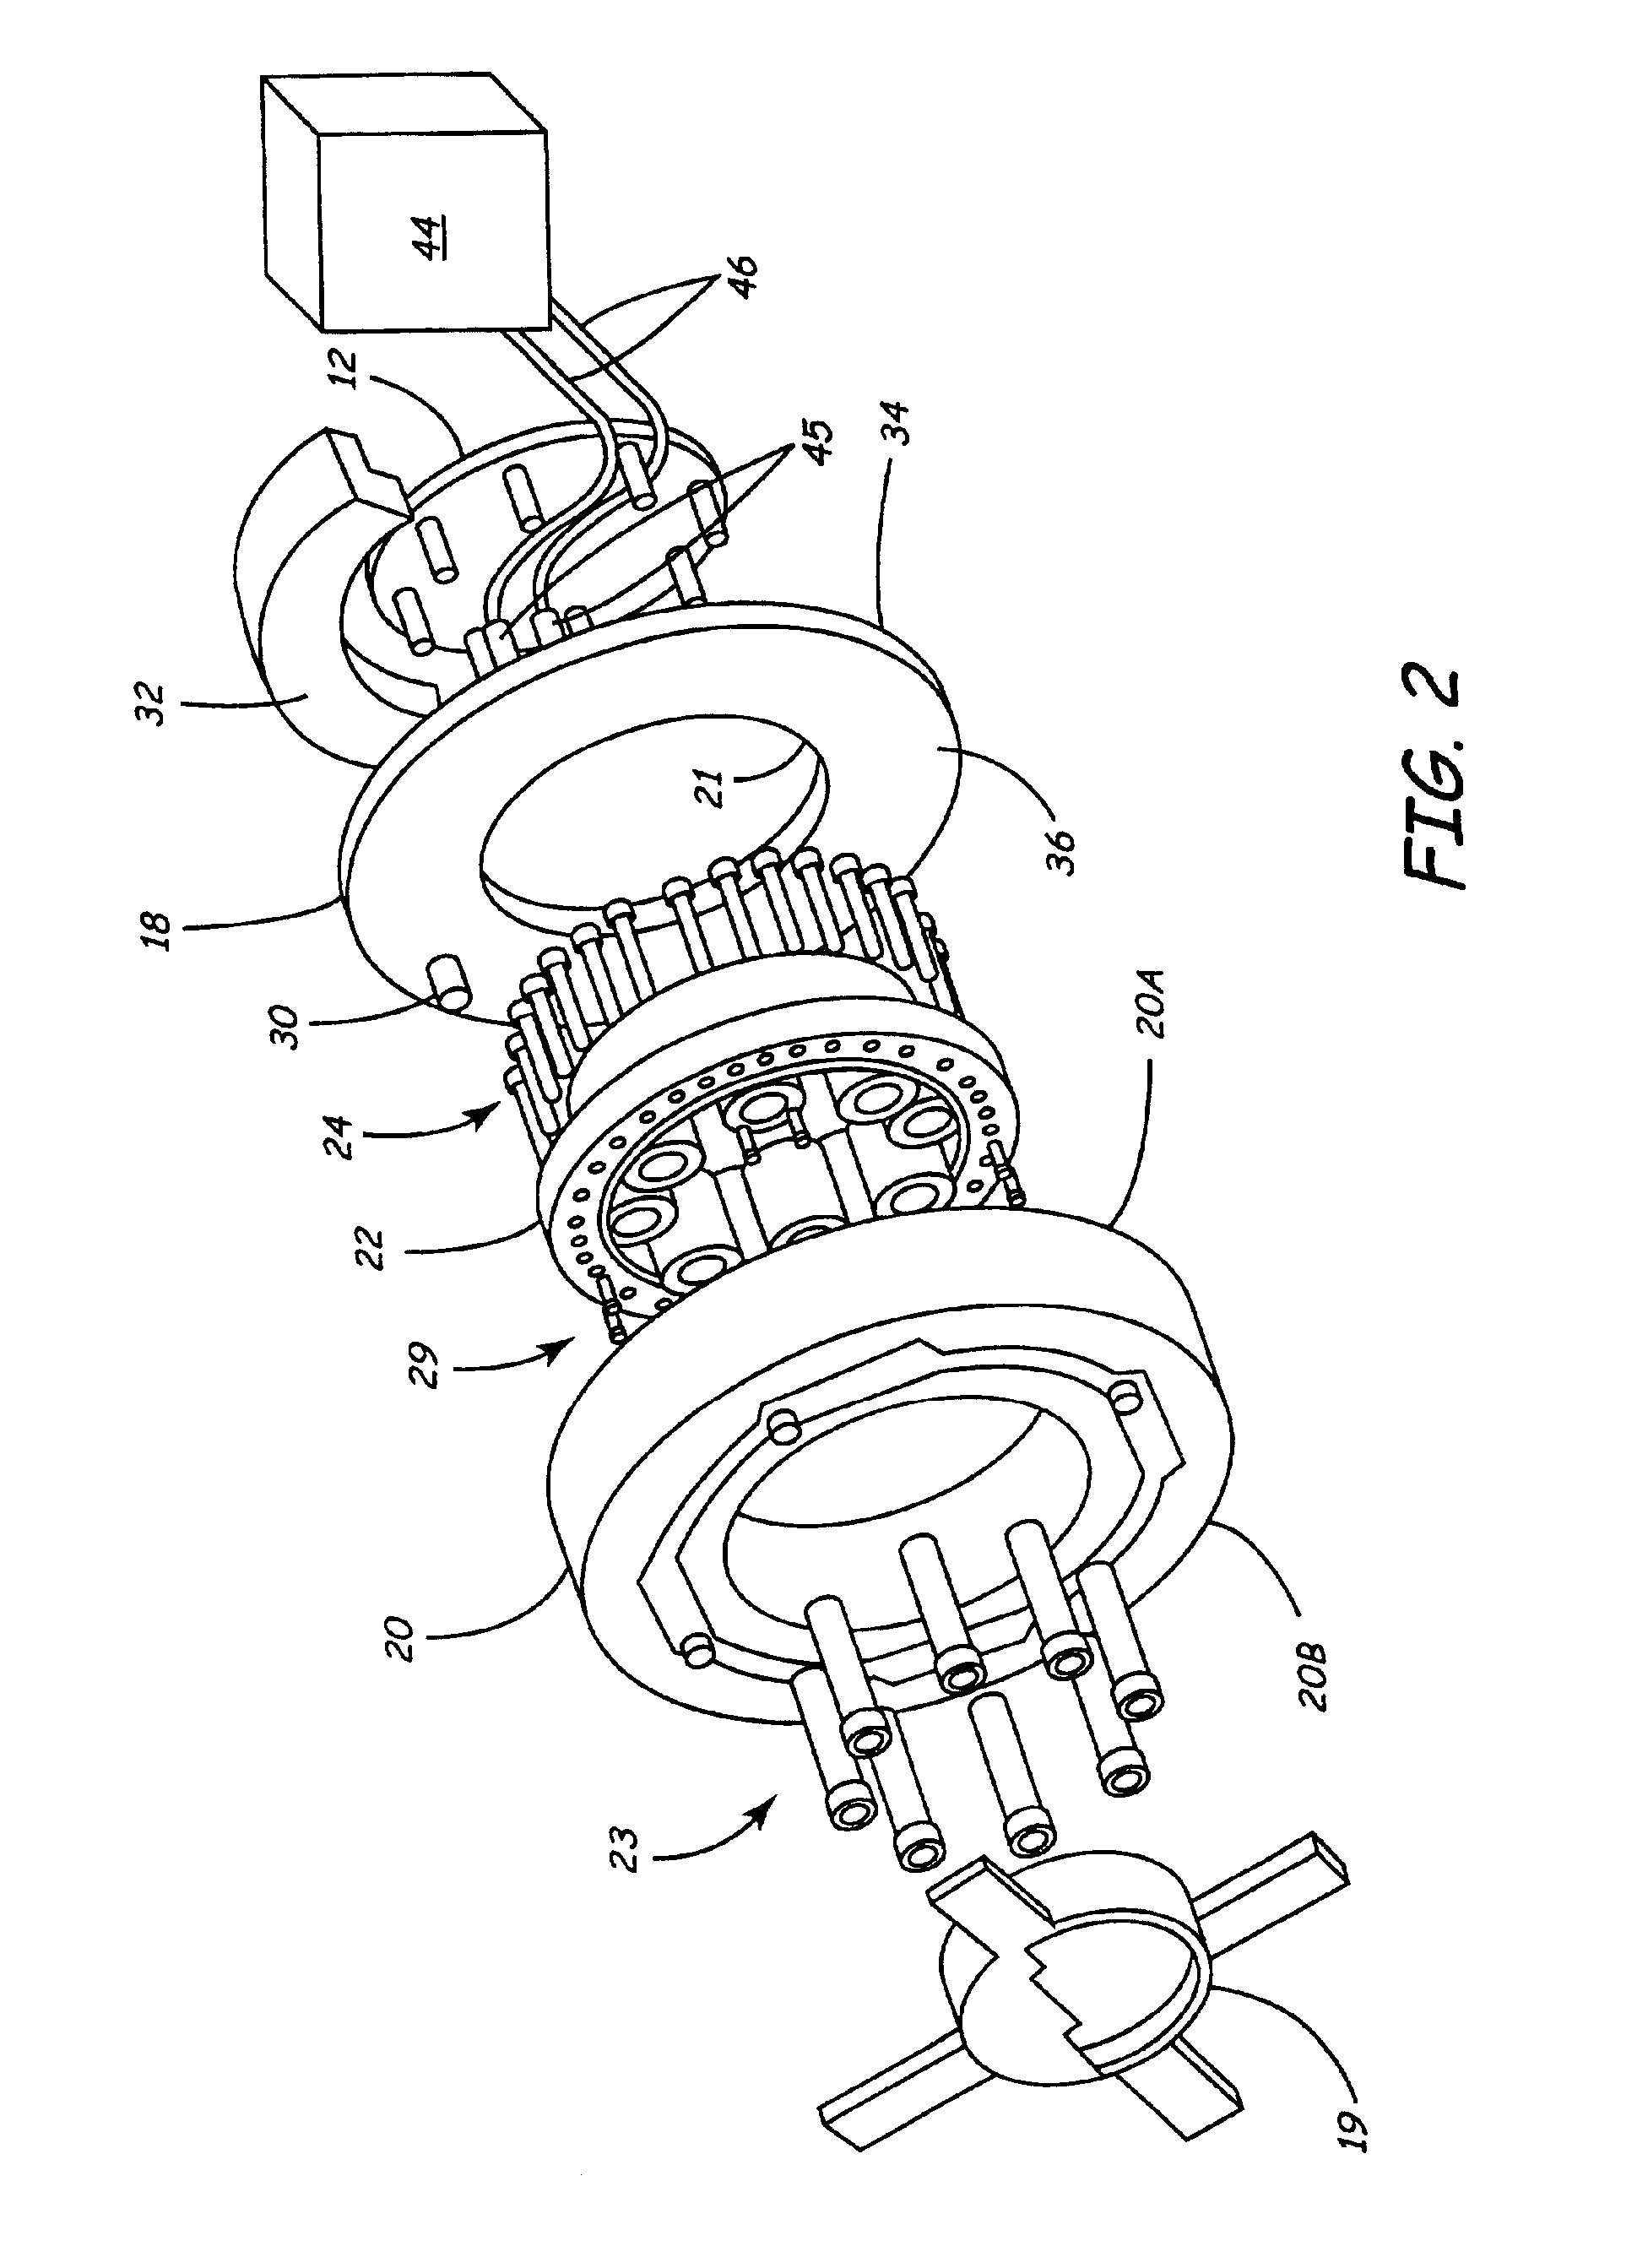 Spindle mounted telemetry system